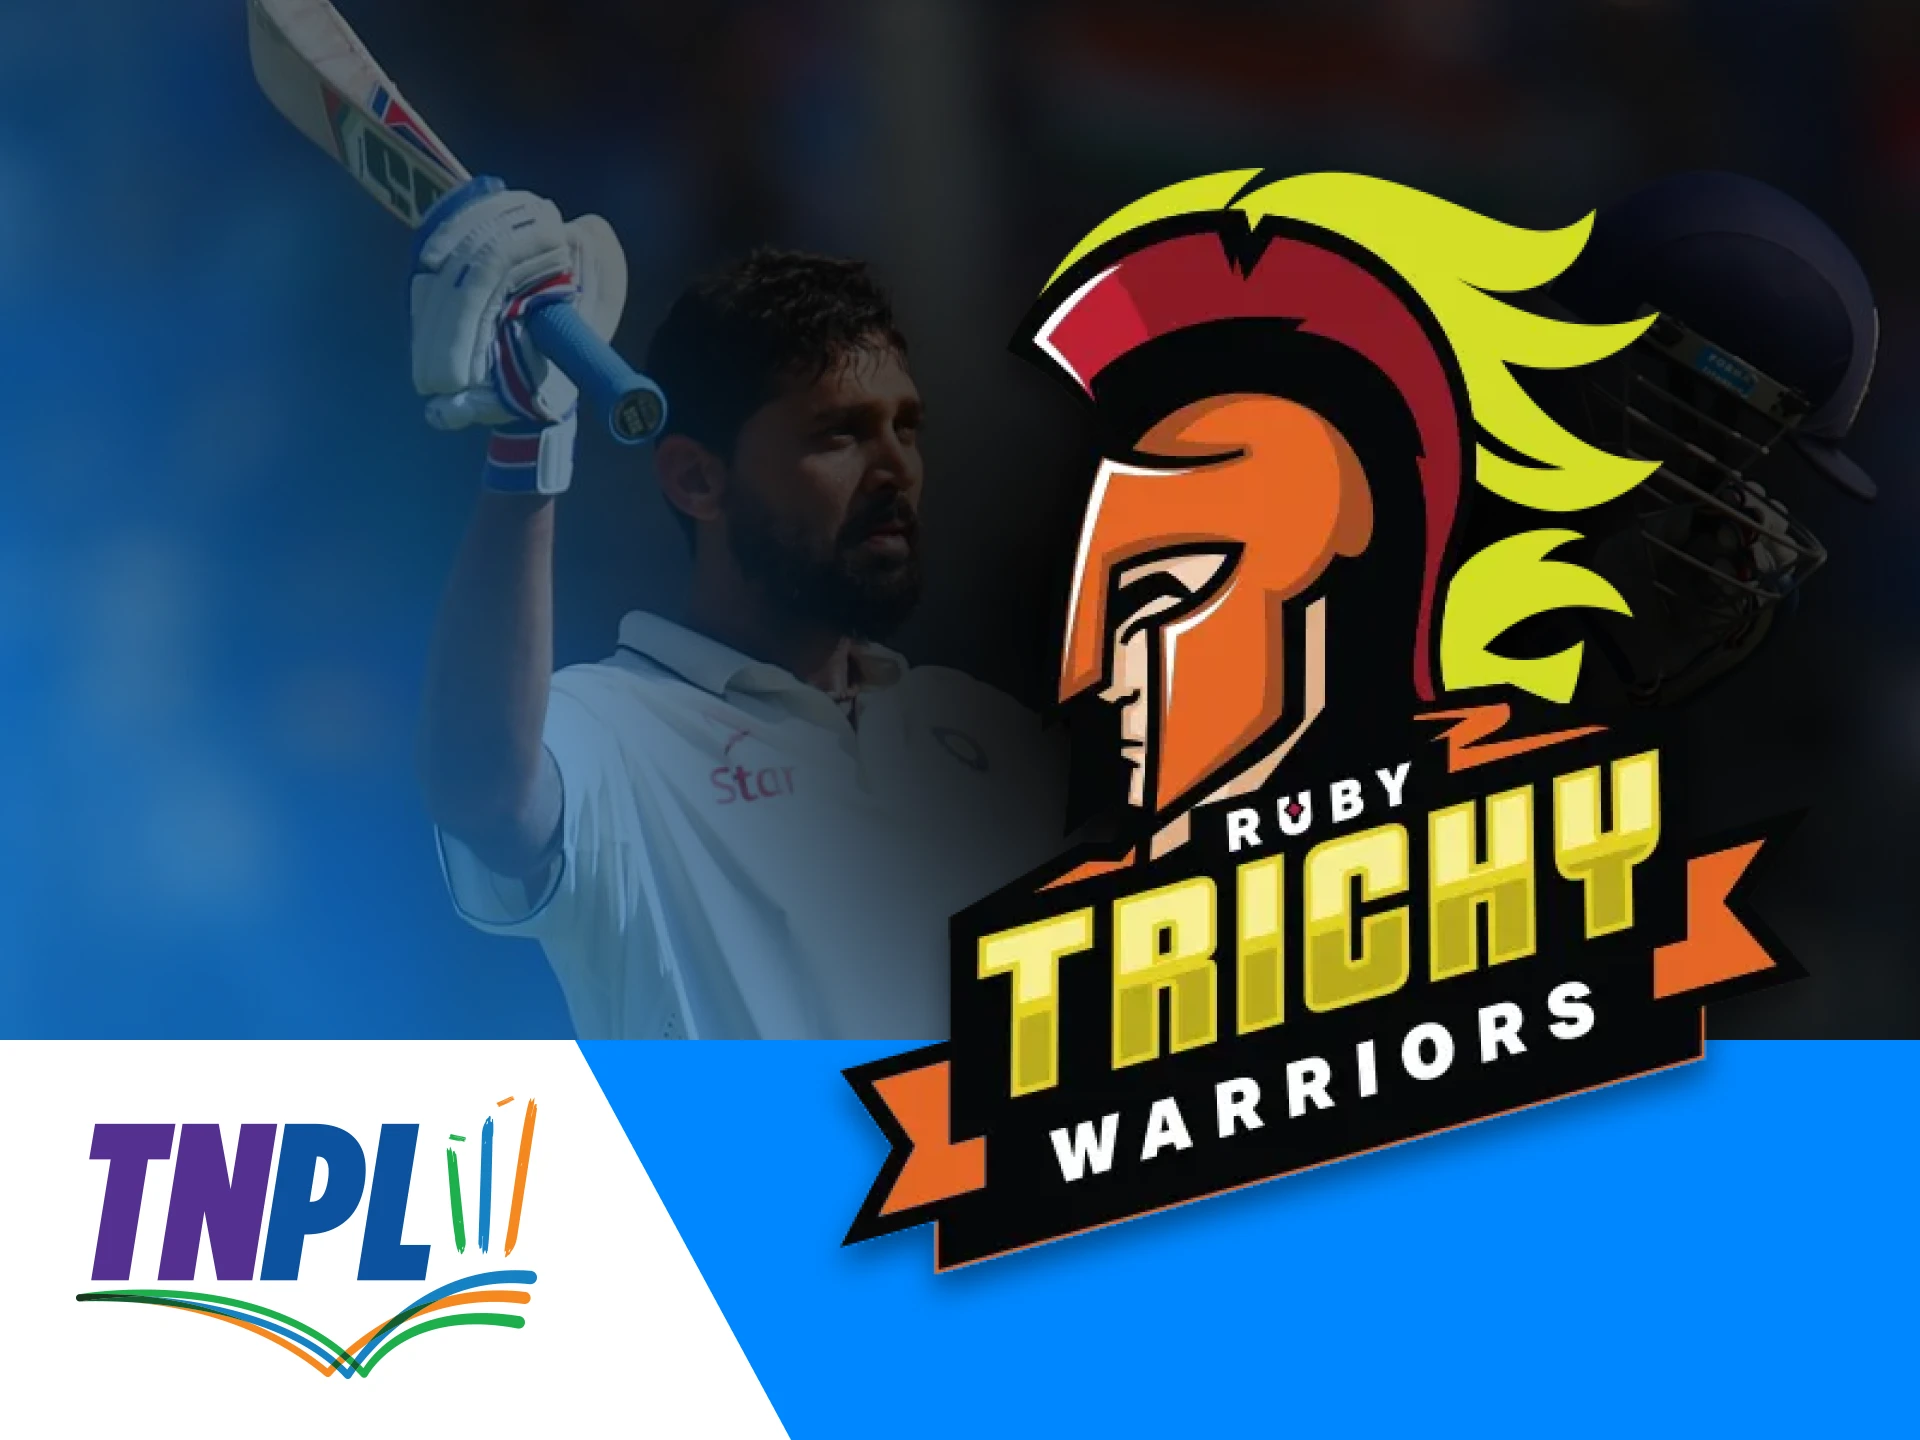 The Ruby Trichy Warriors team is known for having a strong bowling assault.